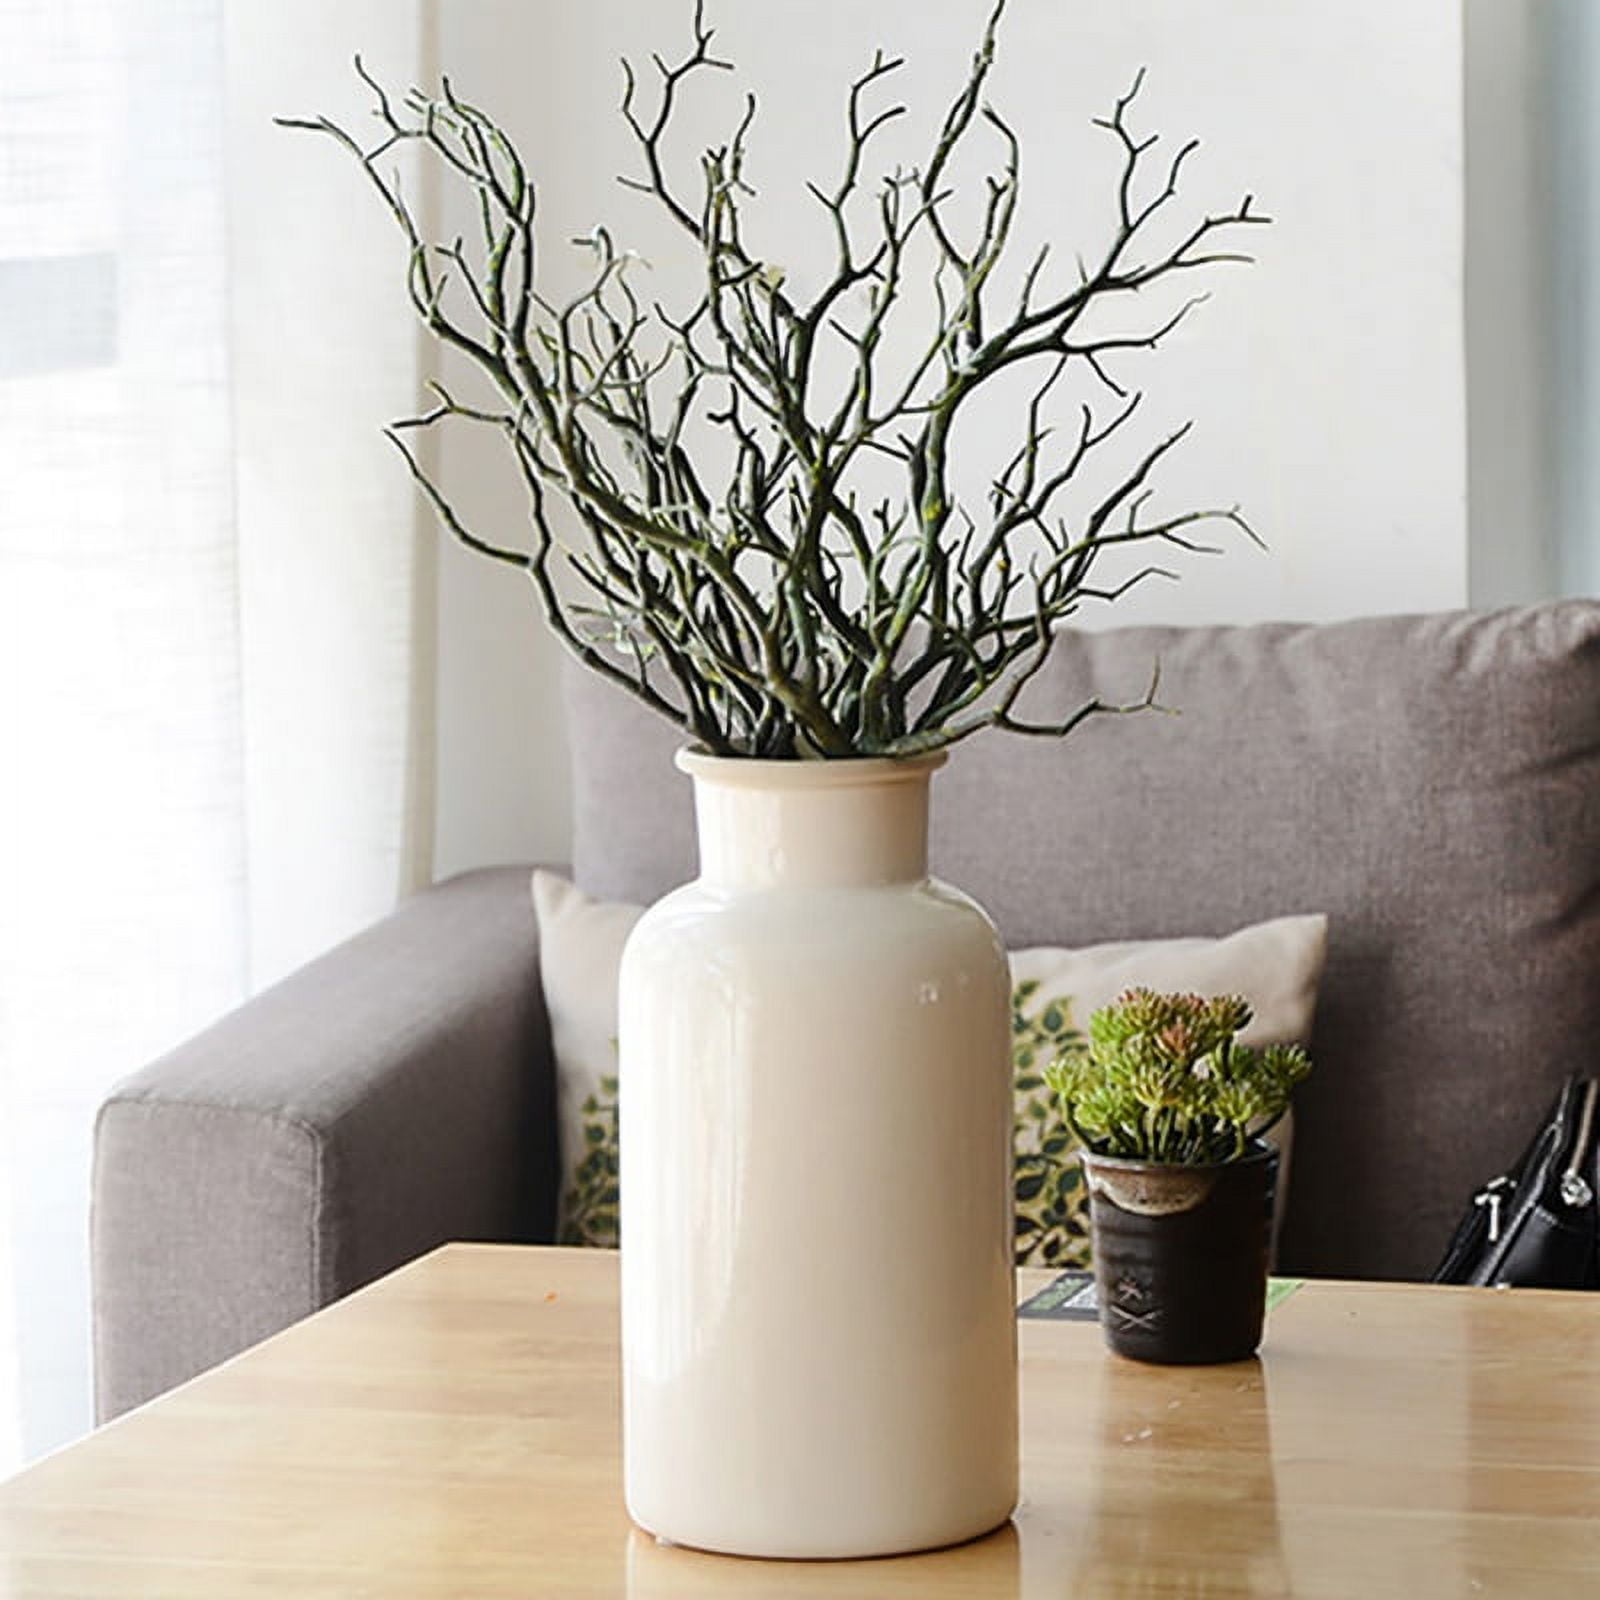 Dried Decorative Branches for Vase Scandinavian Decor Tall